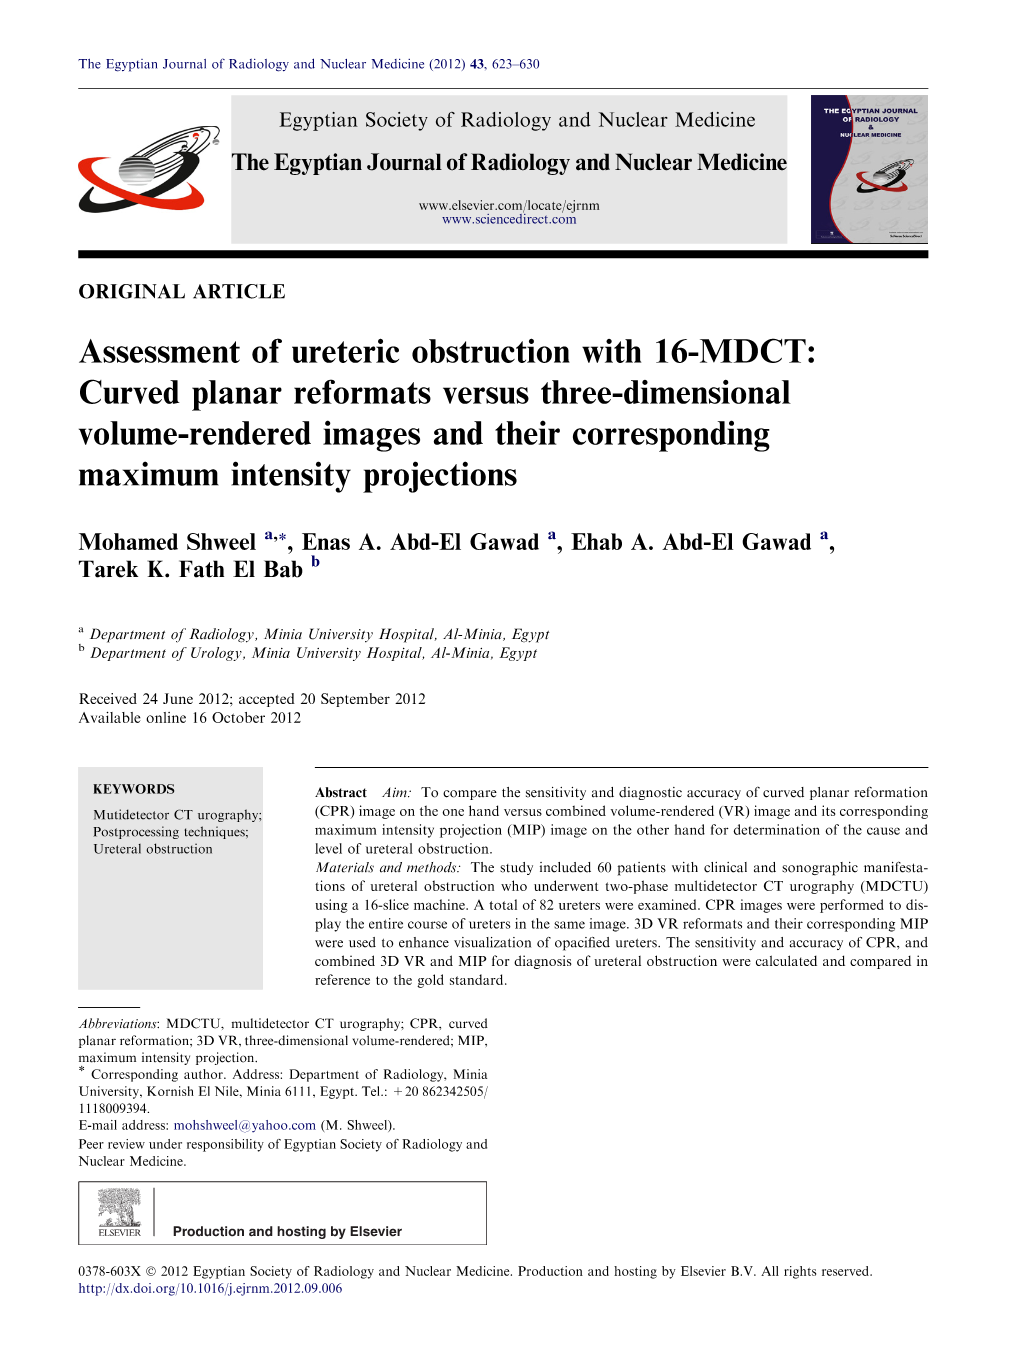 Assessment of Ureteric Obstruction with 16-MDCT: Curved Planar